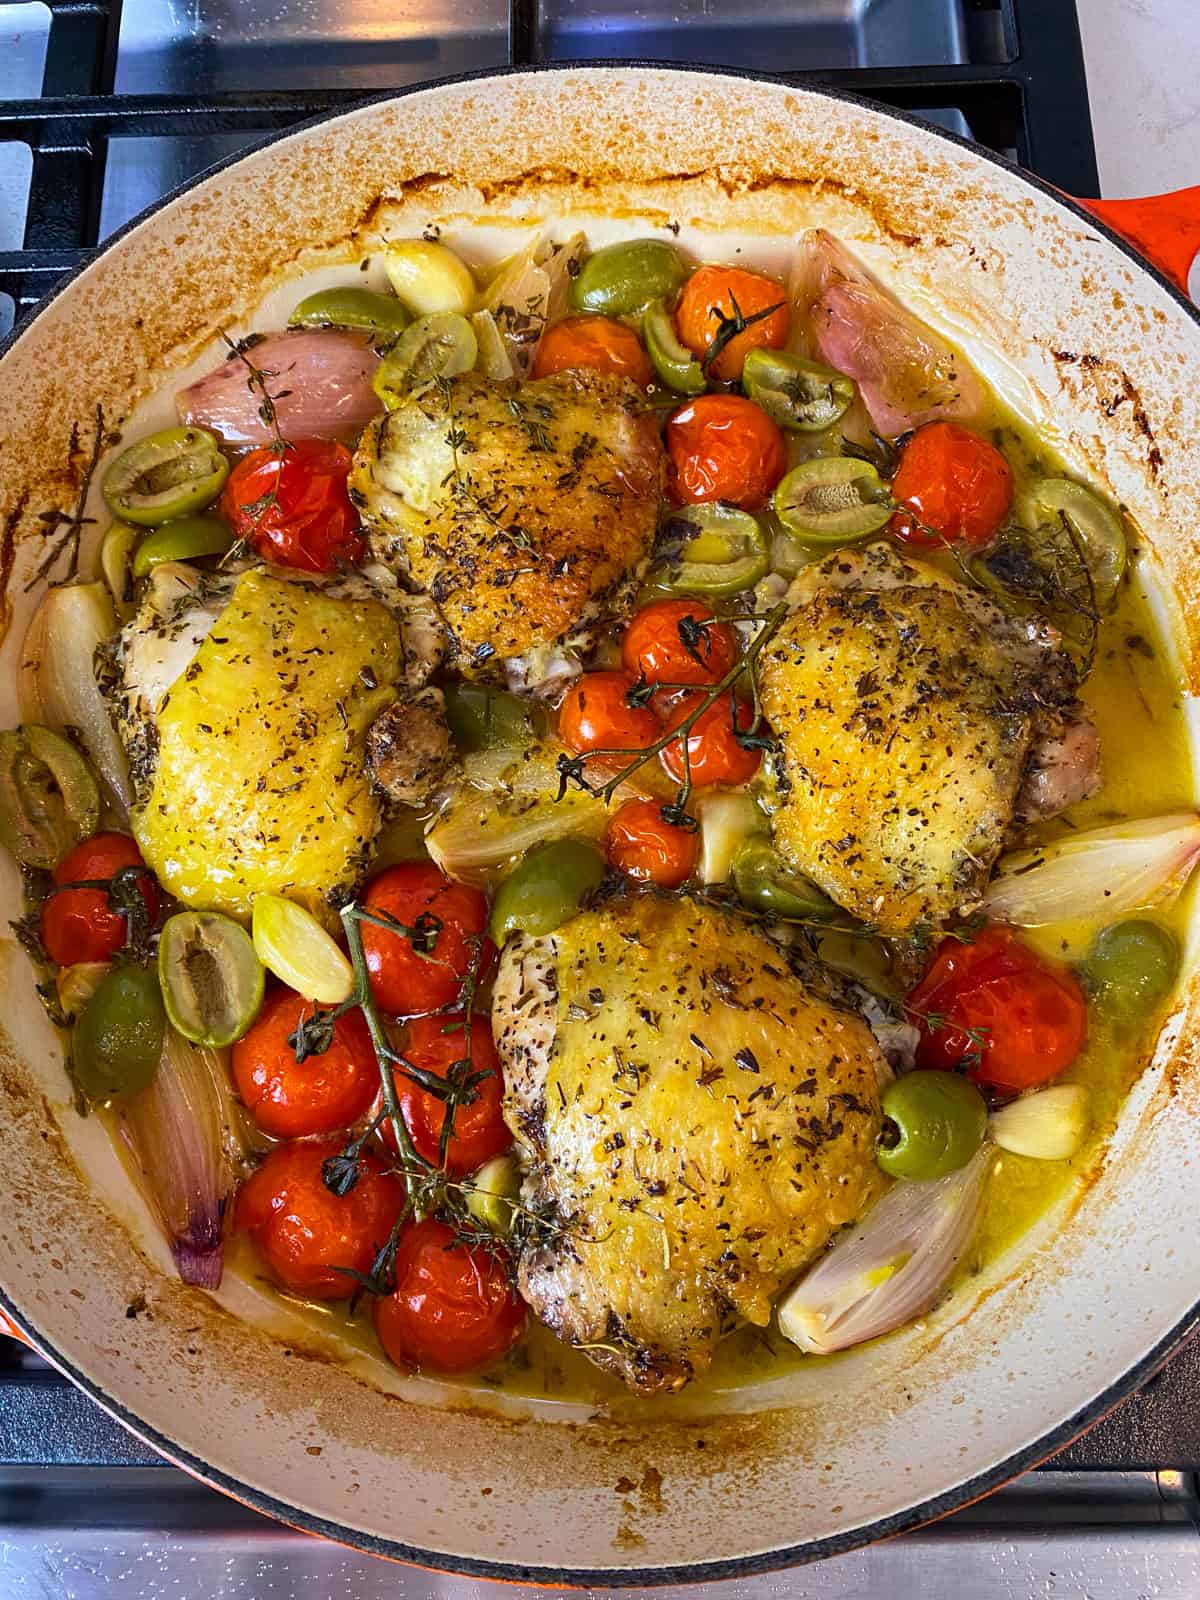 Cook the chicken Provencal in the oven for 30 minutes until the chicken is cooked through and vegetables are tender.